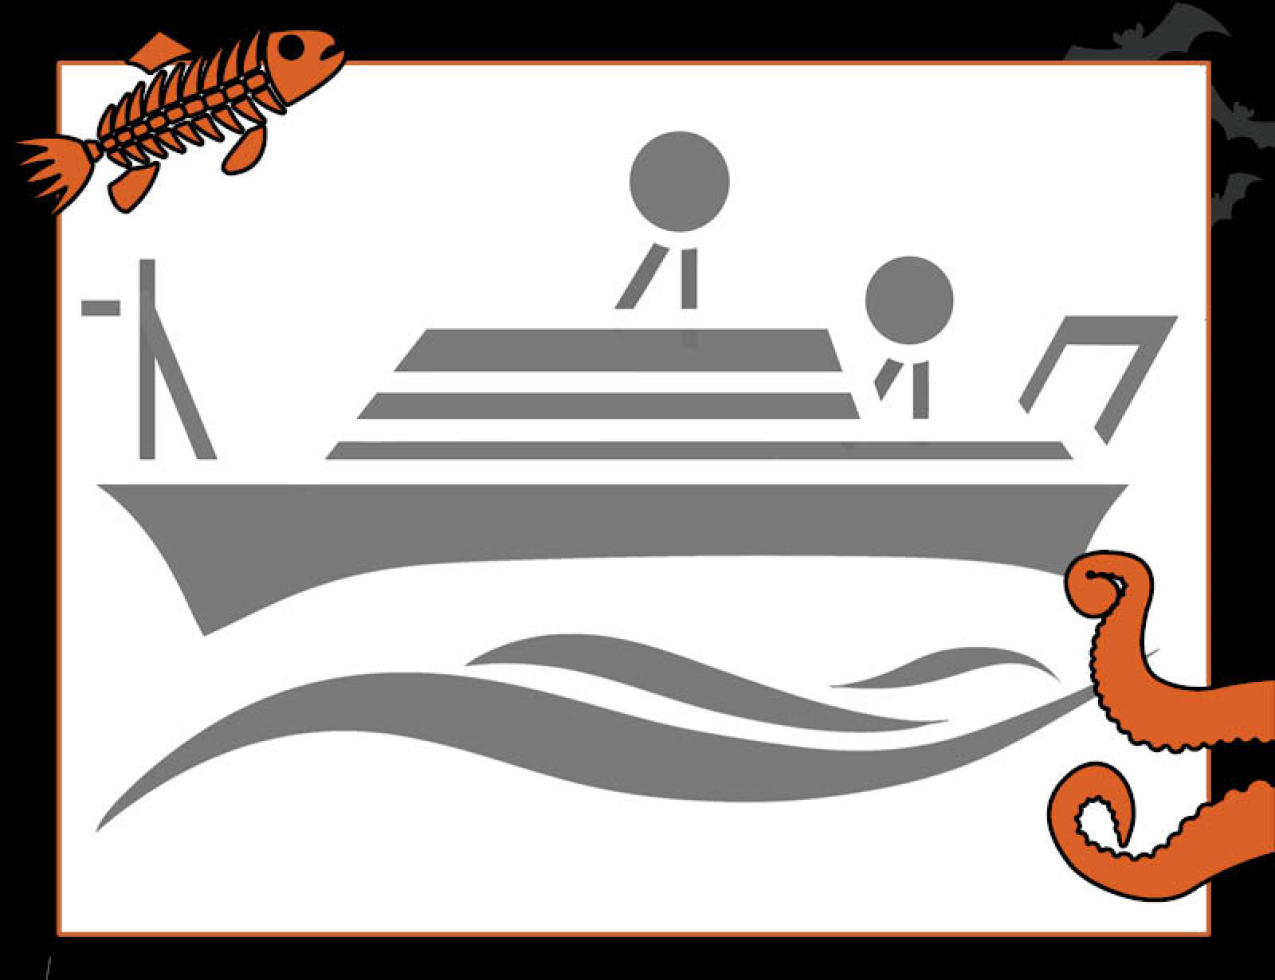 A stencil image of a large ship with waves below. Border of the photo is black with orange sea creature graphics of octopus tentacles and a fish skeleton. Text: Ocean observing pumpkin stencils, #NOAASpookyScience with NOAA logo.